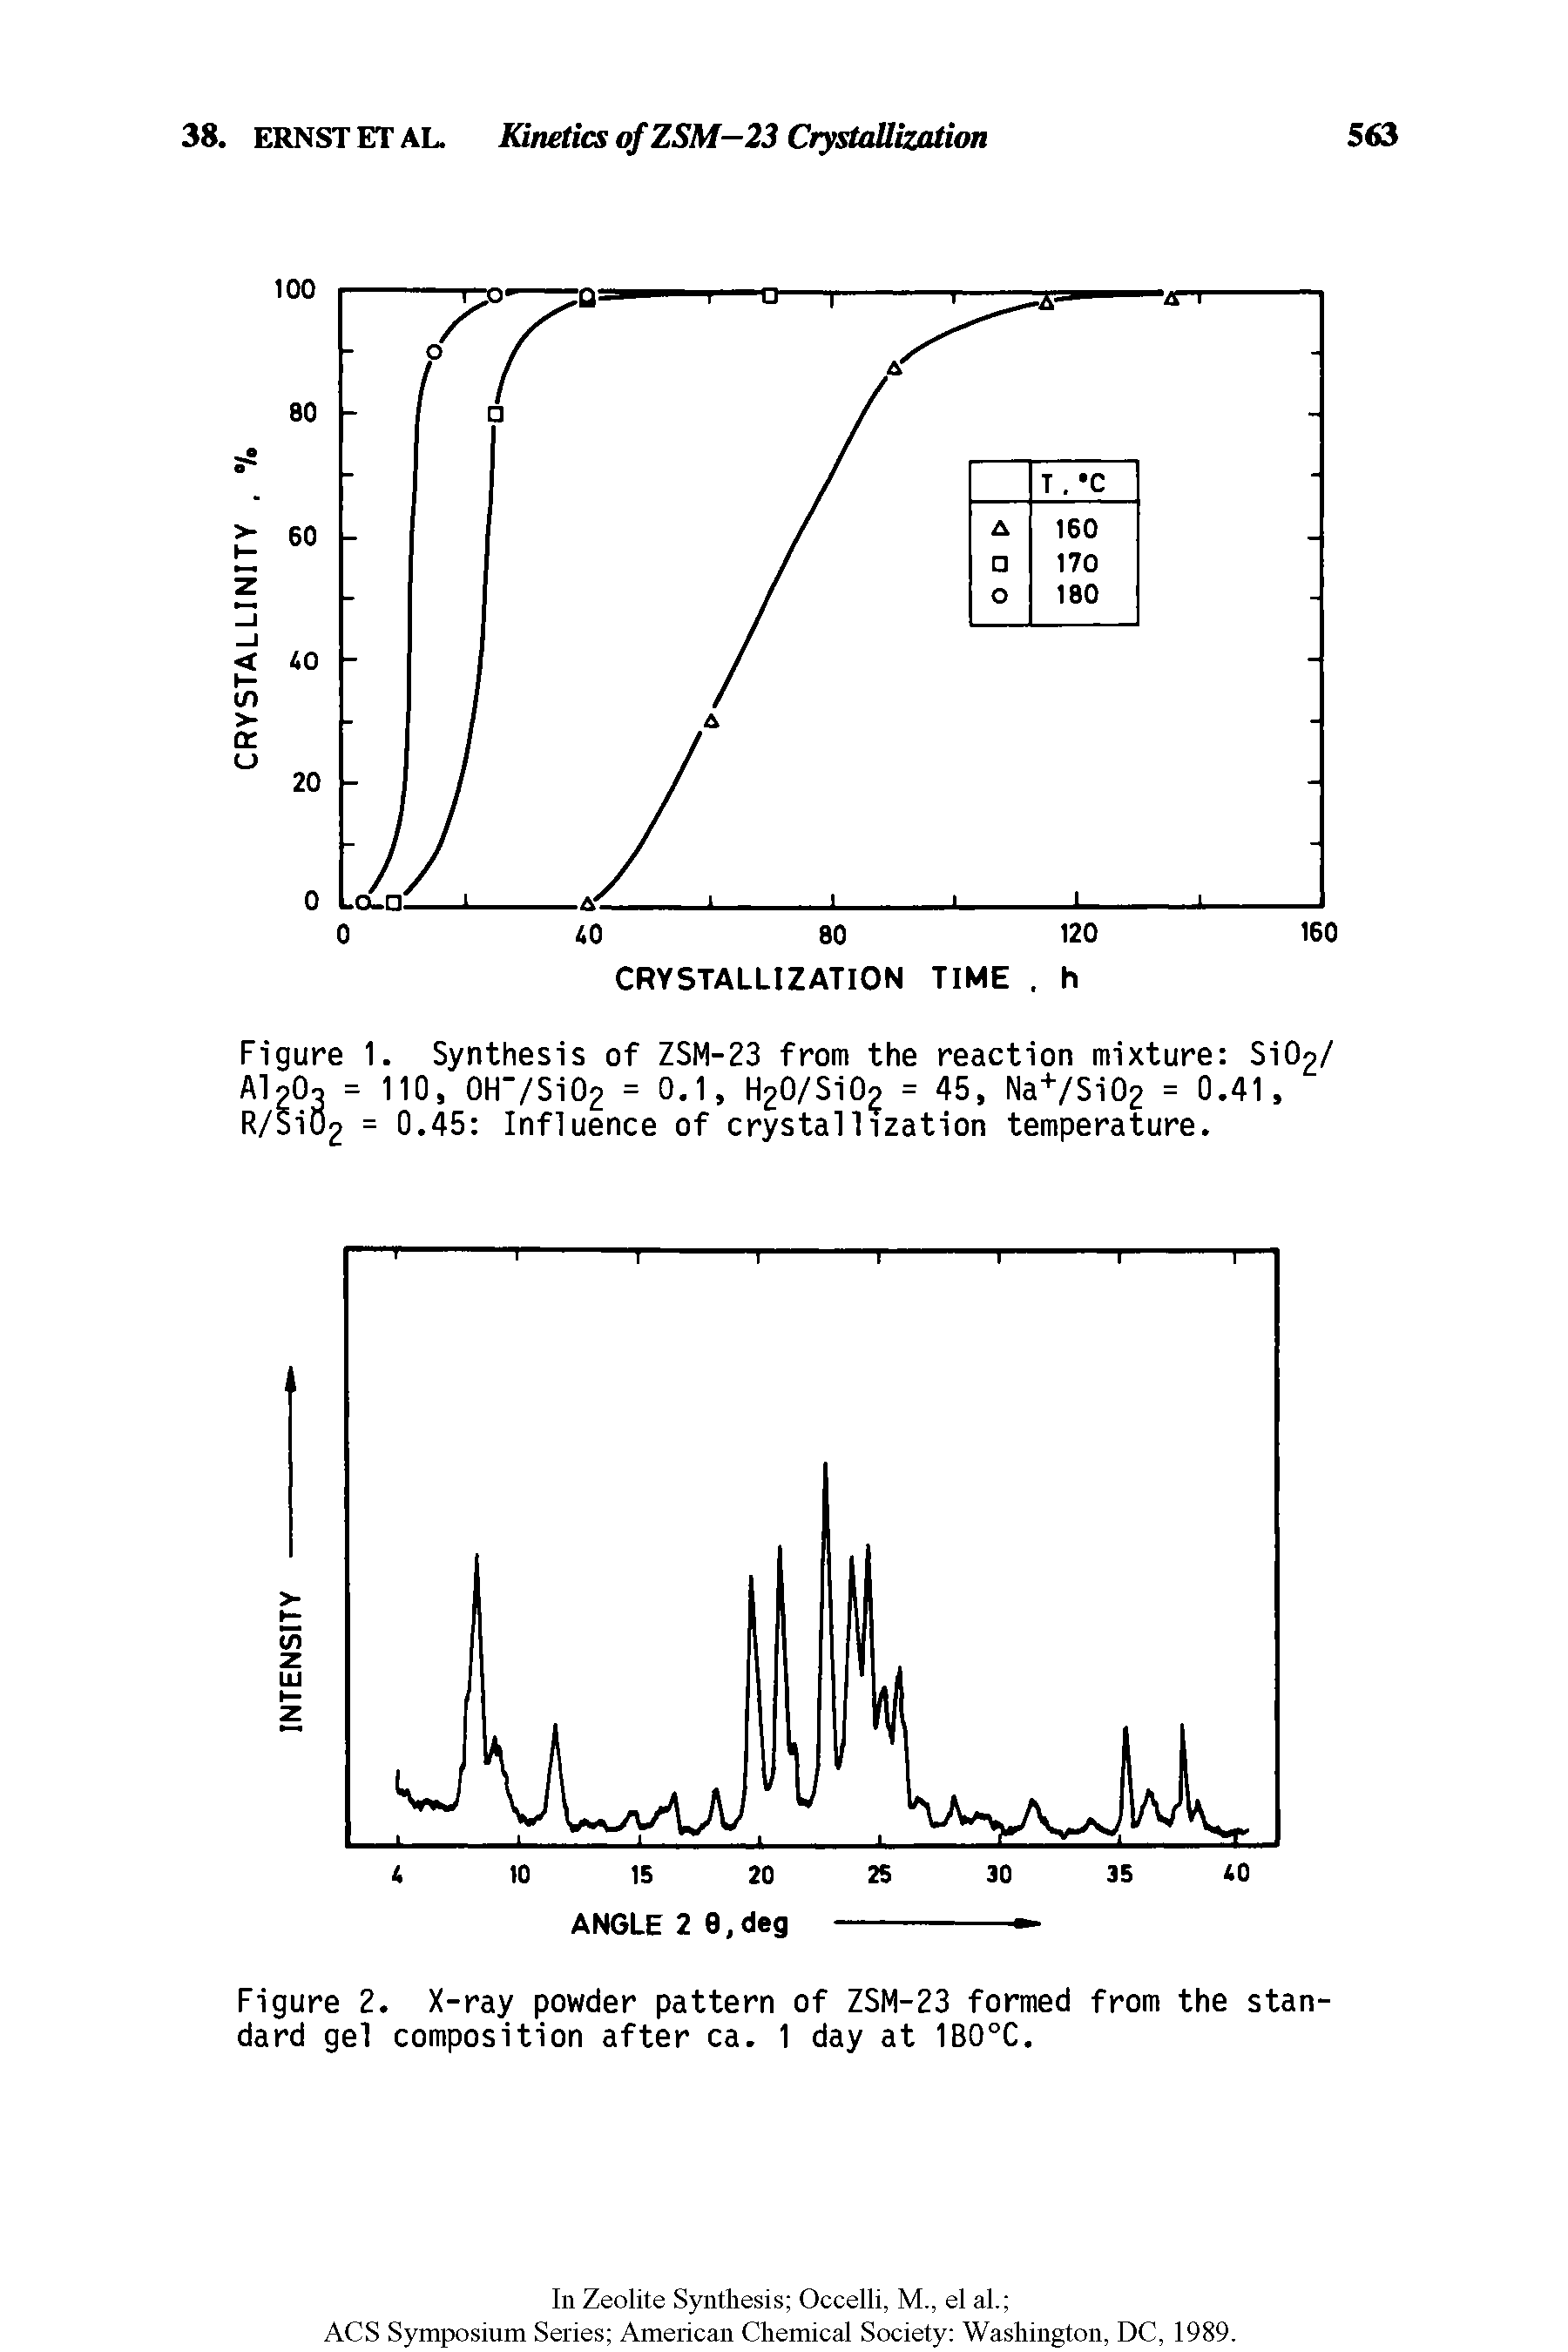 Figure 2. X-ray powder pattern of ZSM-23 formed from the standard gel composition after ca. 1 day at 1B0°C.